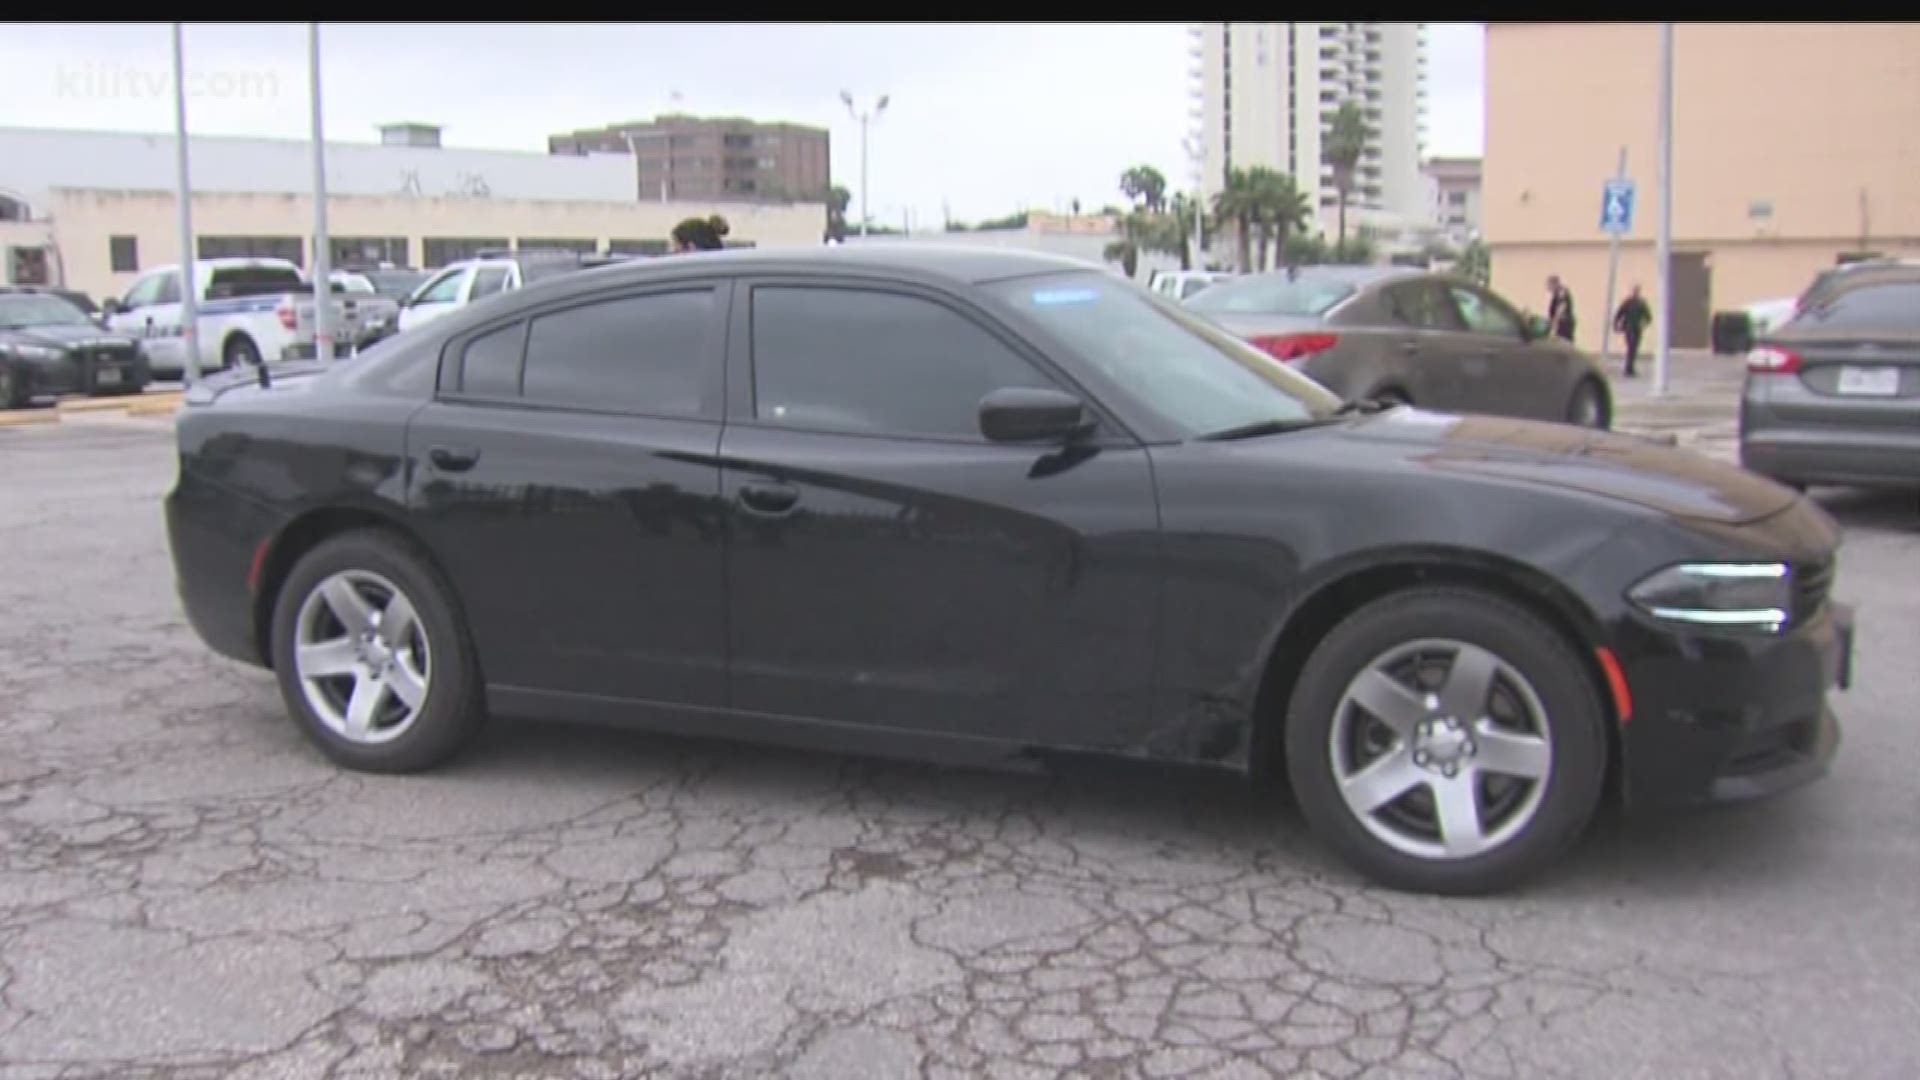 CCPD adds new 'stealth car' to fleet